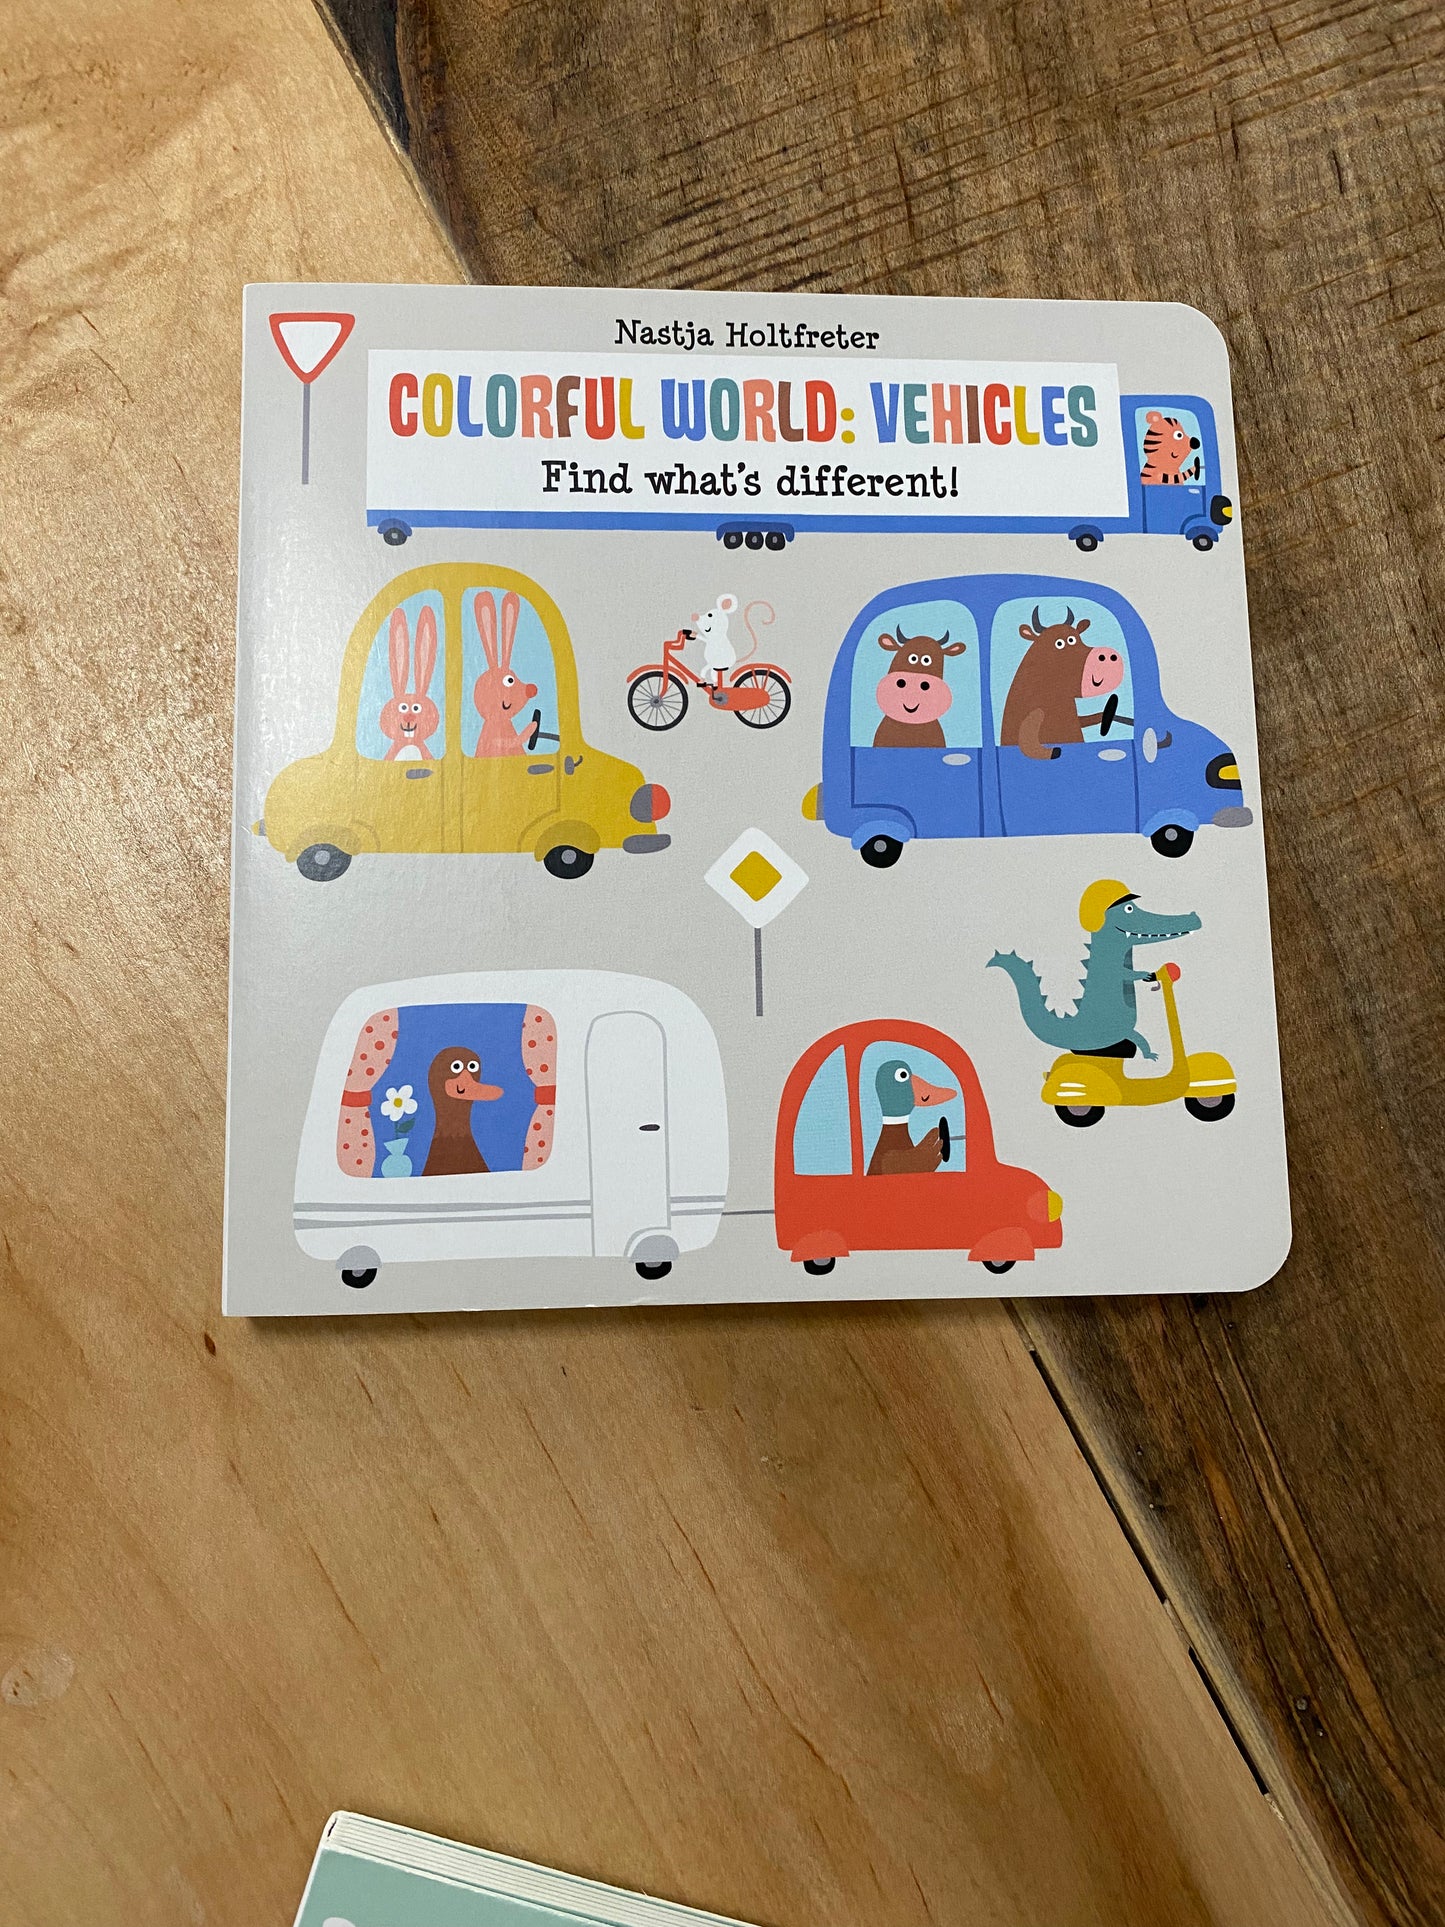 Colorful world vehicles